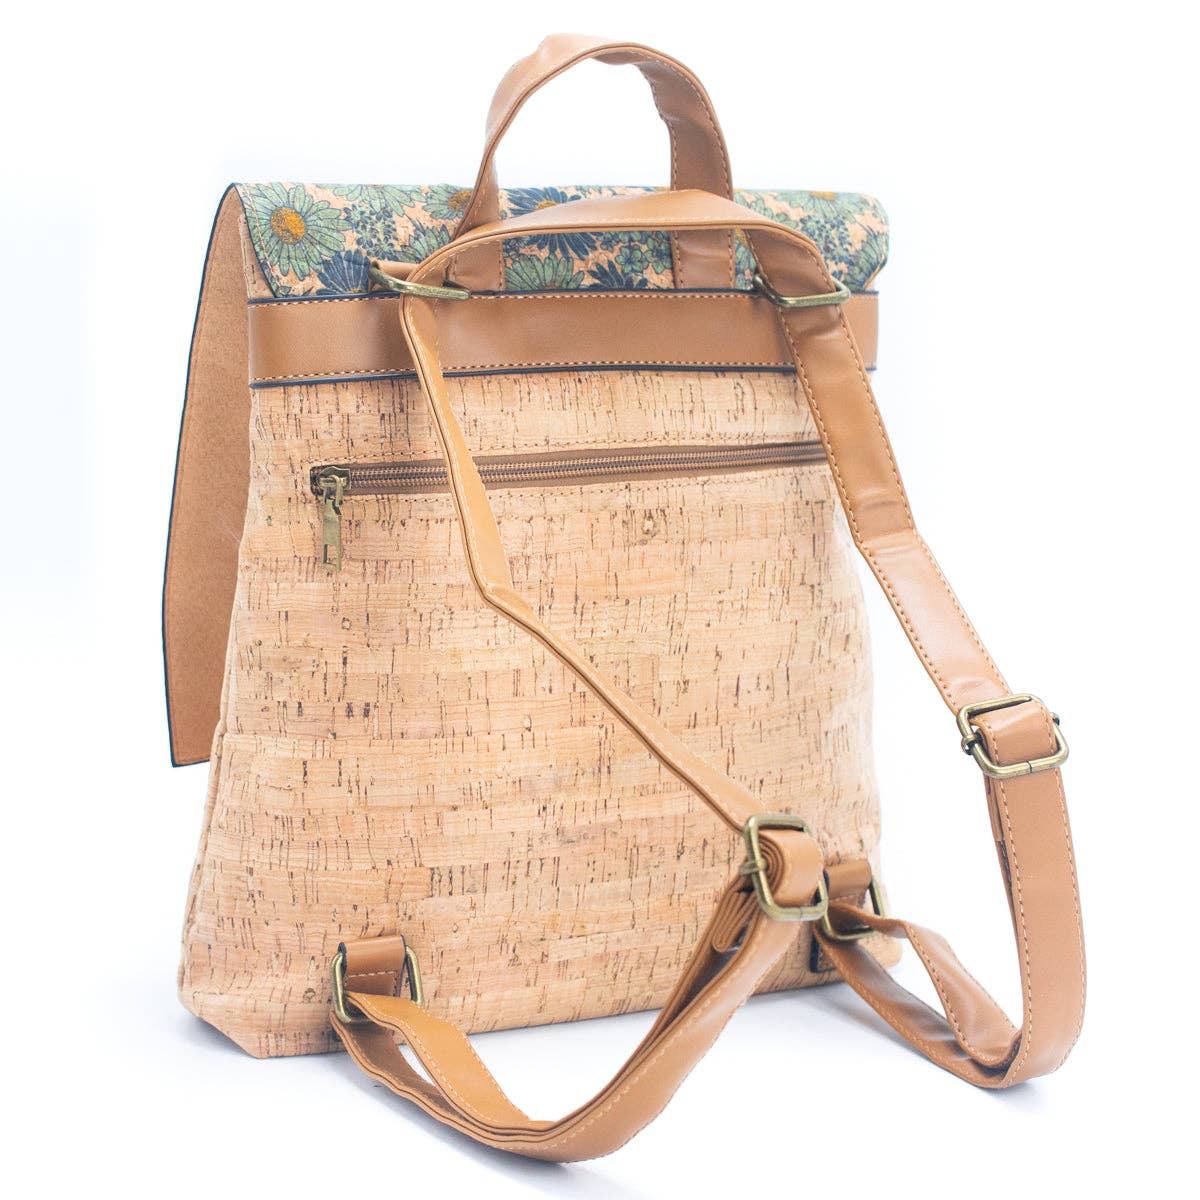 Angelco Accessories cork backpack with colourful design and vegan leather straps as shown from rear